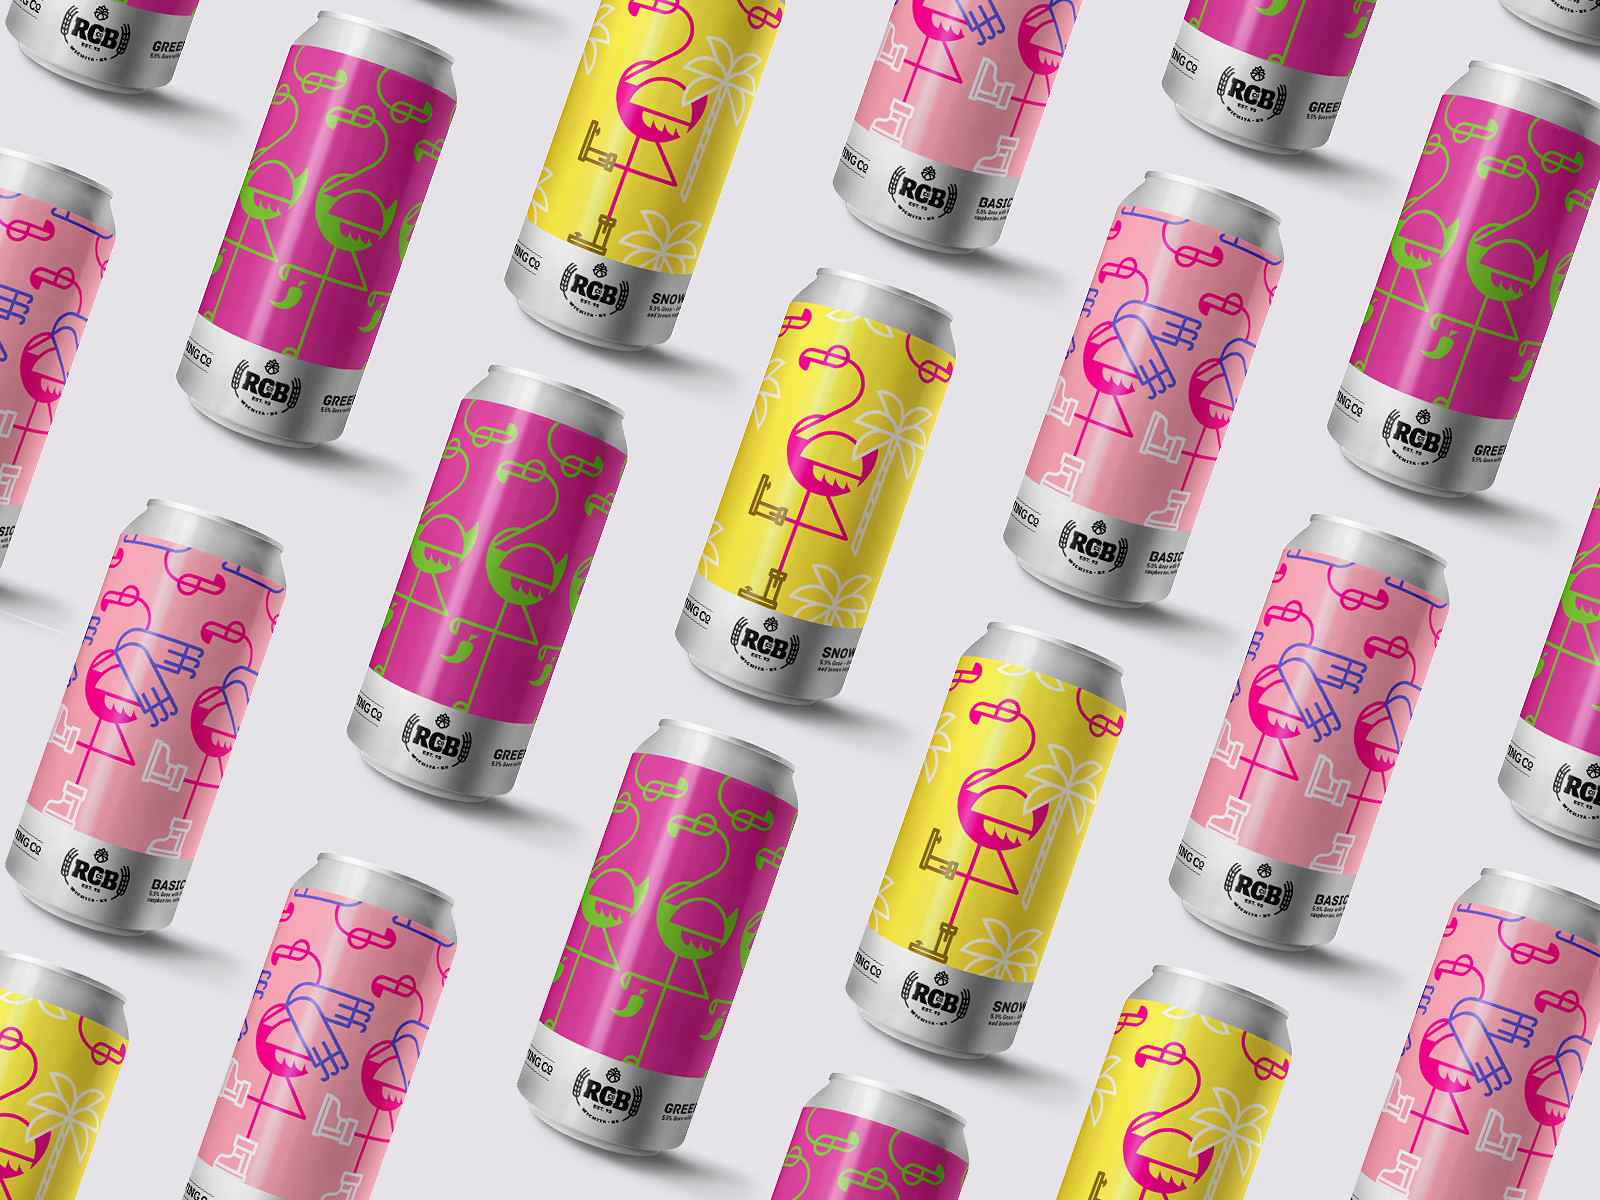 Craft Beer Flamingos by Dustin Commer on Dribbble